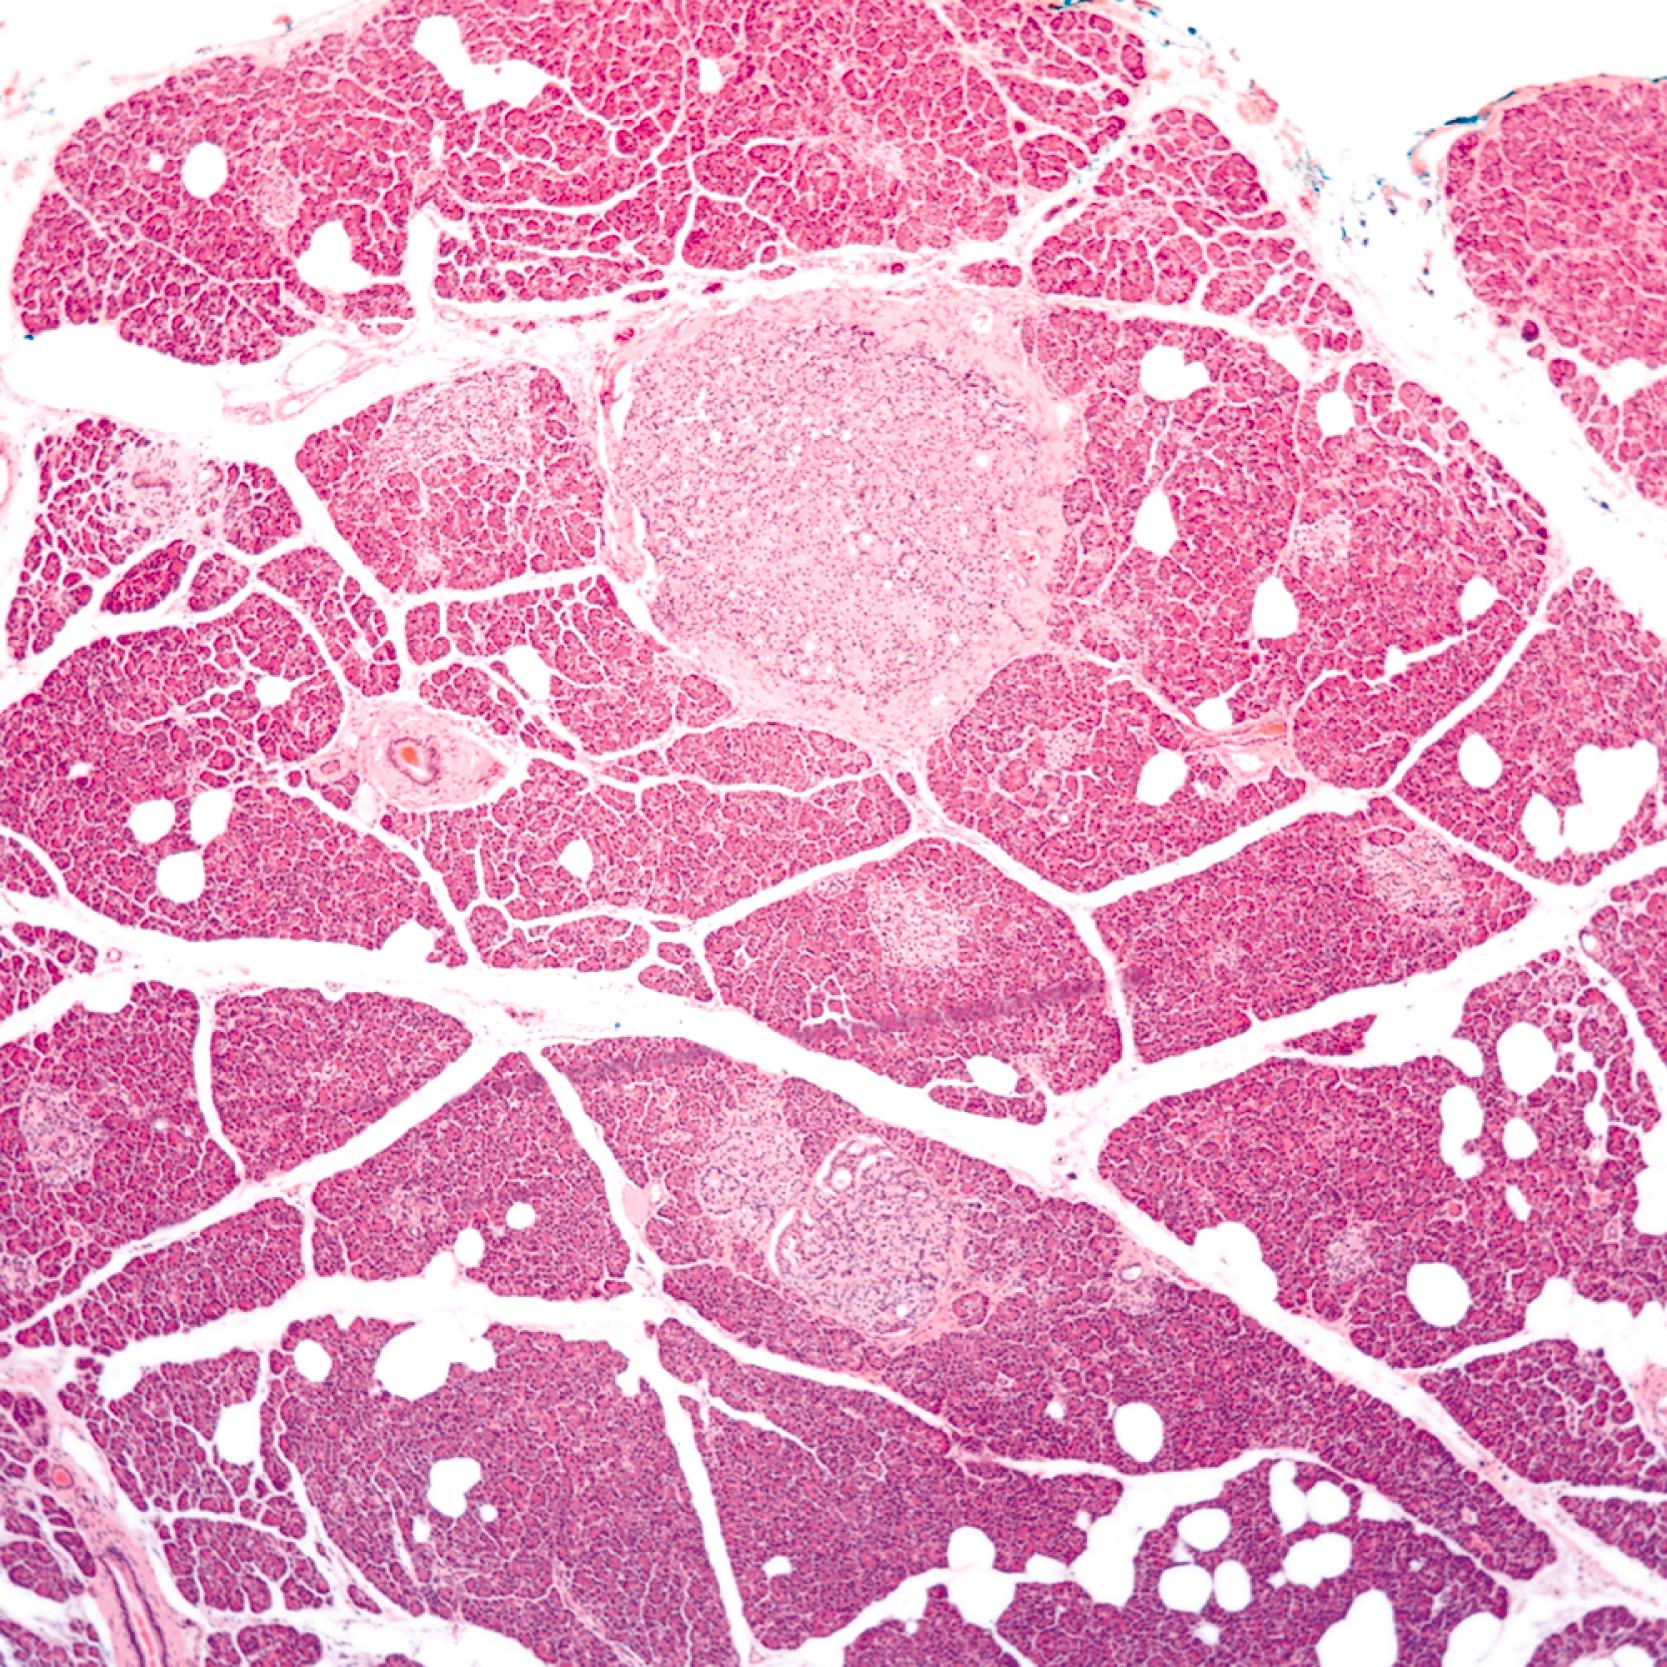 FIGURE 29.2, Incipient neuroendocrine tumor (NET) in a patient with MEN-1 syndrome. Micro-NET (so called microadenoma ) of the pancreas, characterized by a circumscribed nodule separated from the surrounding parenchyma by a thin band of fibrous tissue. Most examples of this phenomenon have a nesting or trabecular growth pattern and a clonal appearance, which can be highlighted by hormone immunostains.